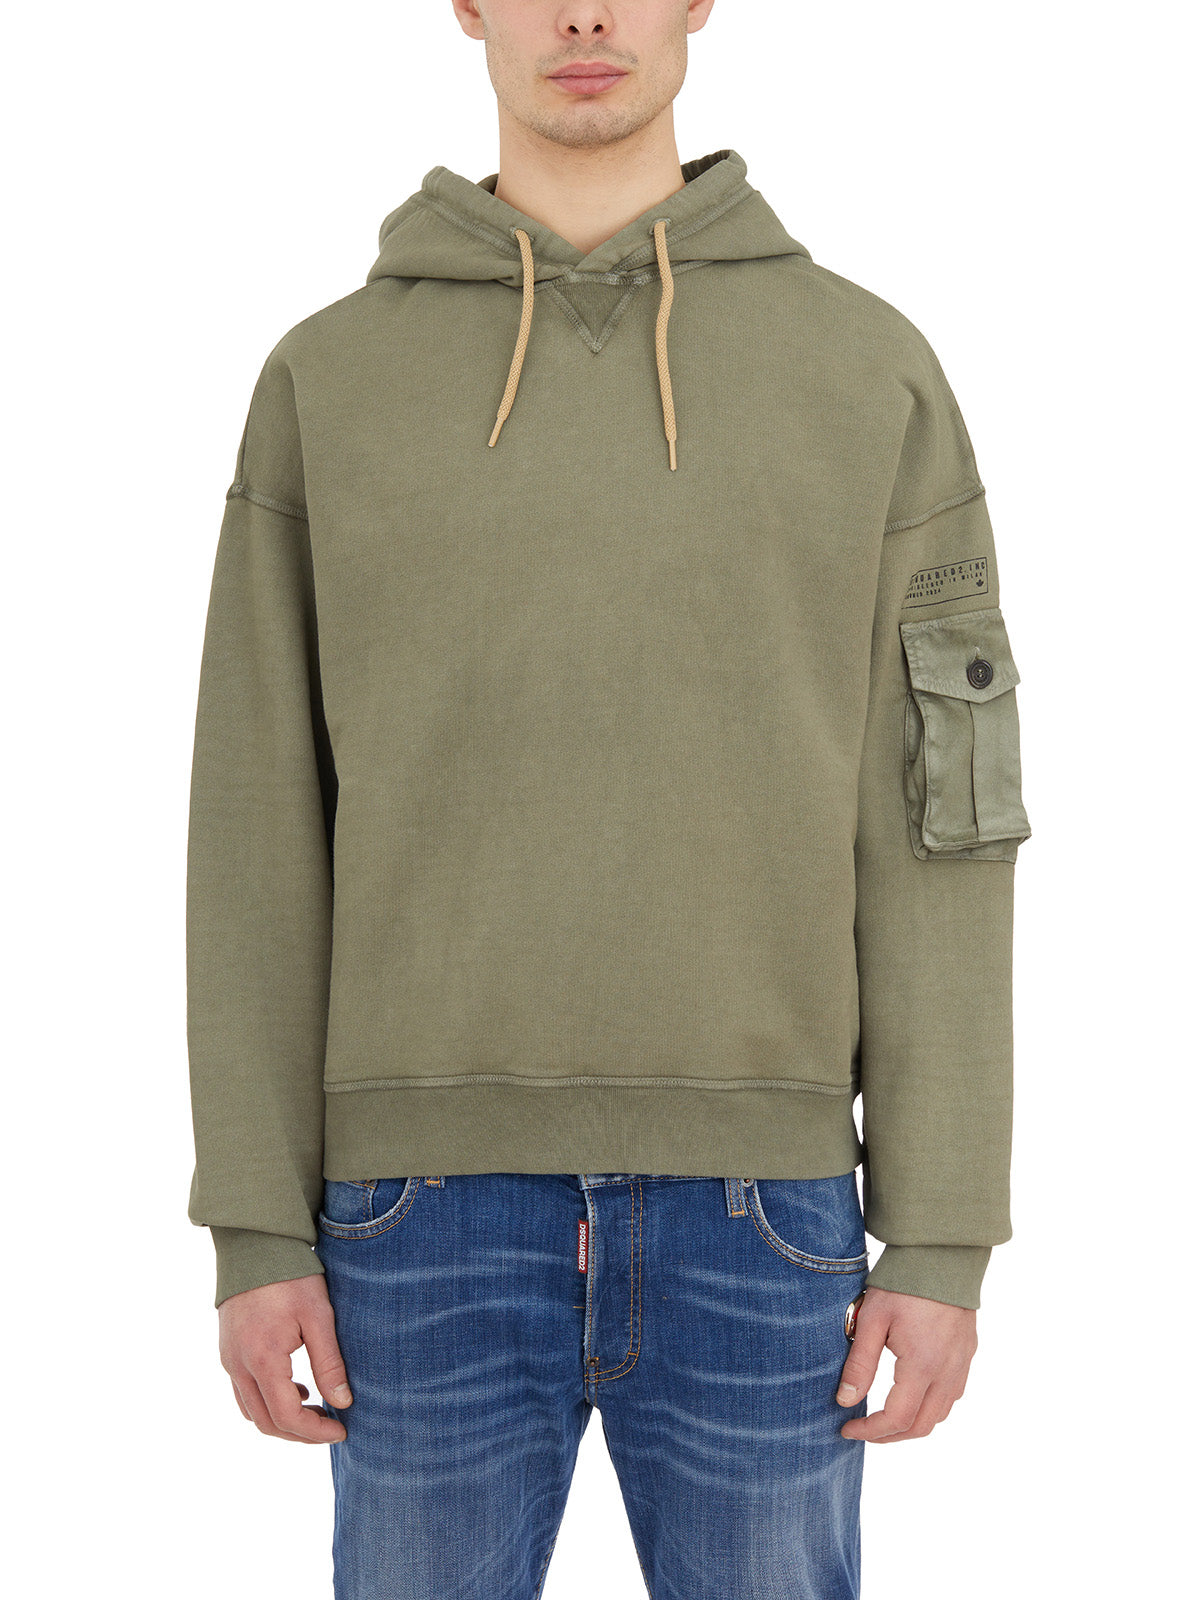 DSQUARED2 Green Cotton Hooded Sweatshirt with Drawstring and Sleeve Pocket for Men